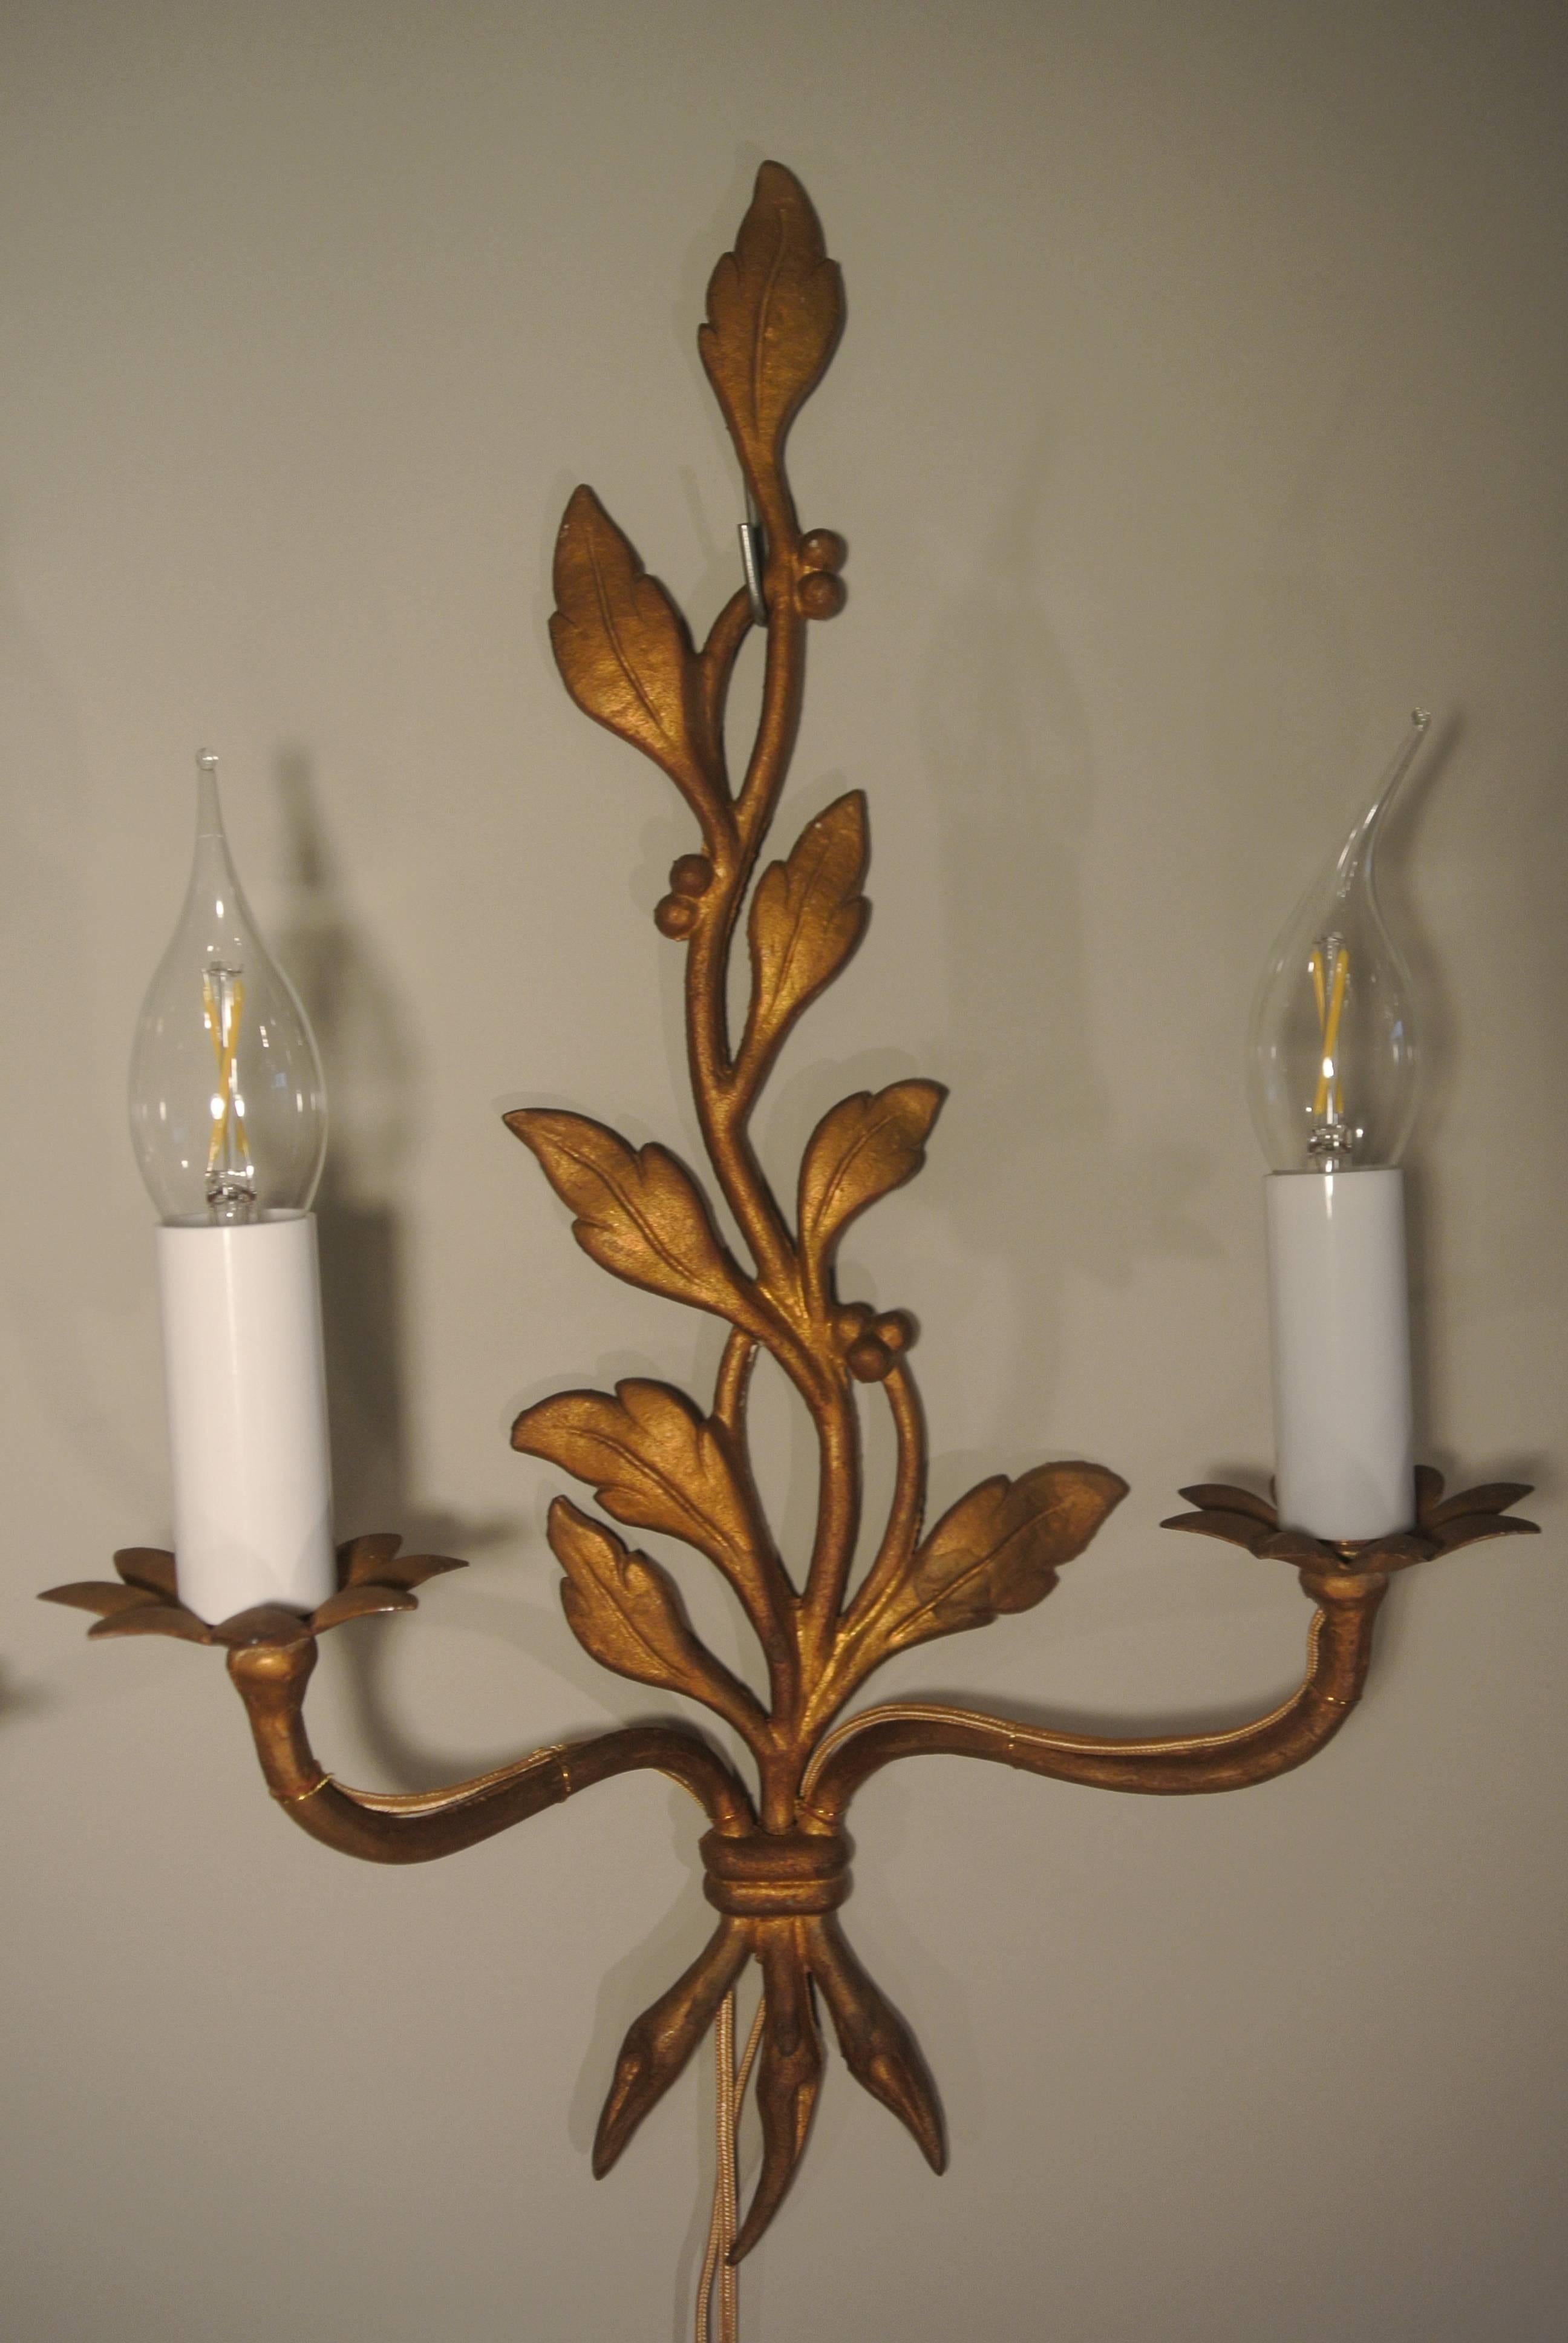 Pair of Mid-Century Modern Gold Gilt Bronze Sconces in a Leaf Design, circa 1960 For Sale 2